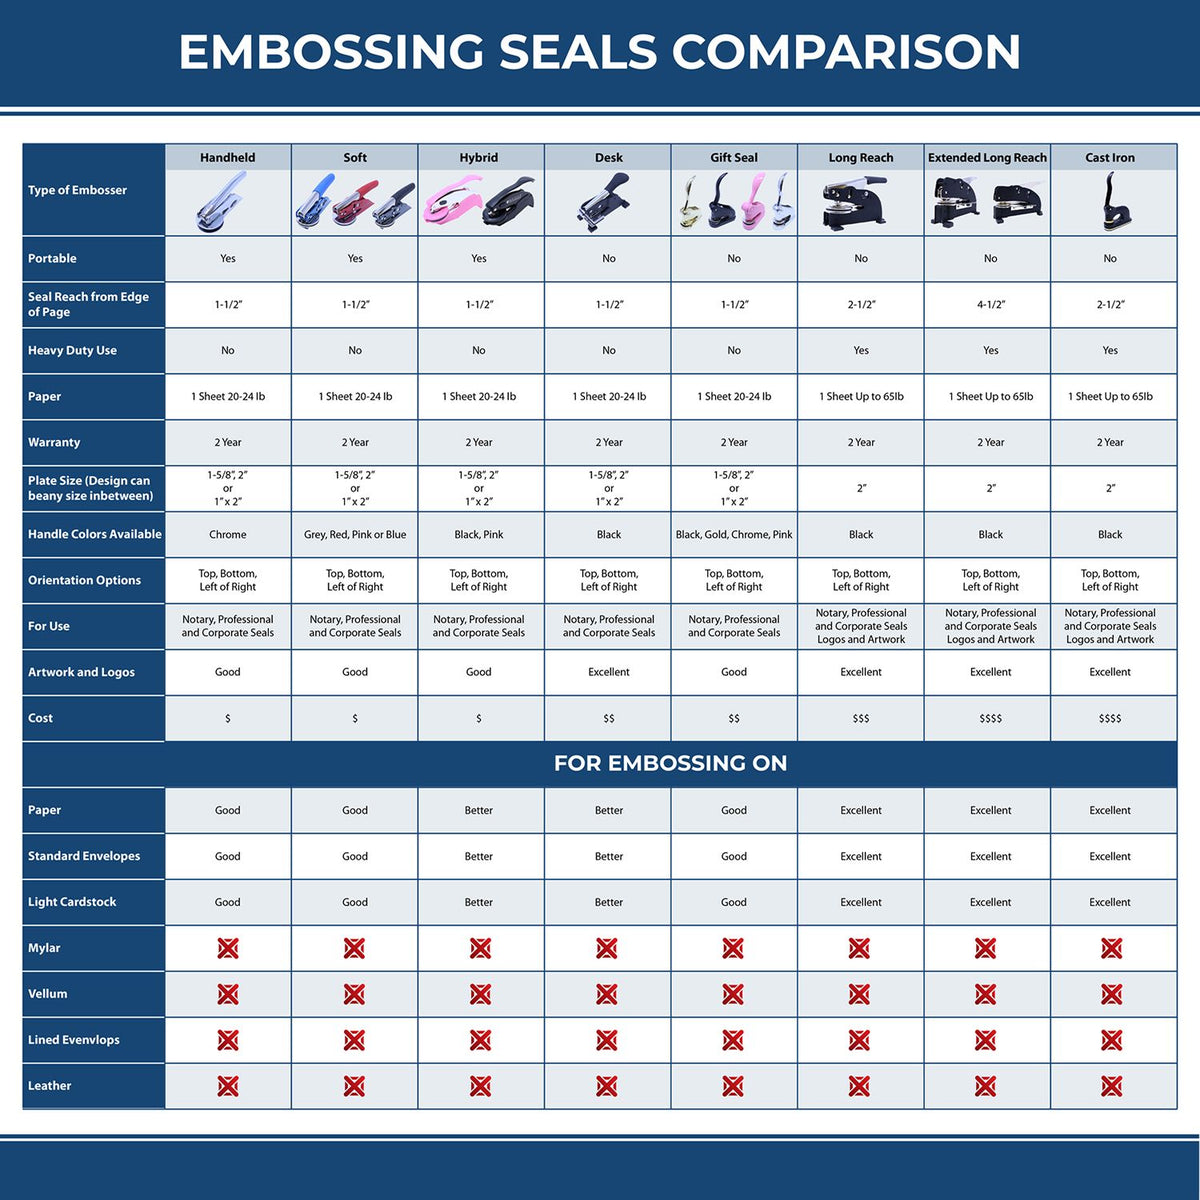 A comparison chart for the different types of mount models available for the Long Reach Nebraska Land Surveyor Seal.